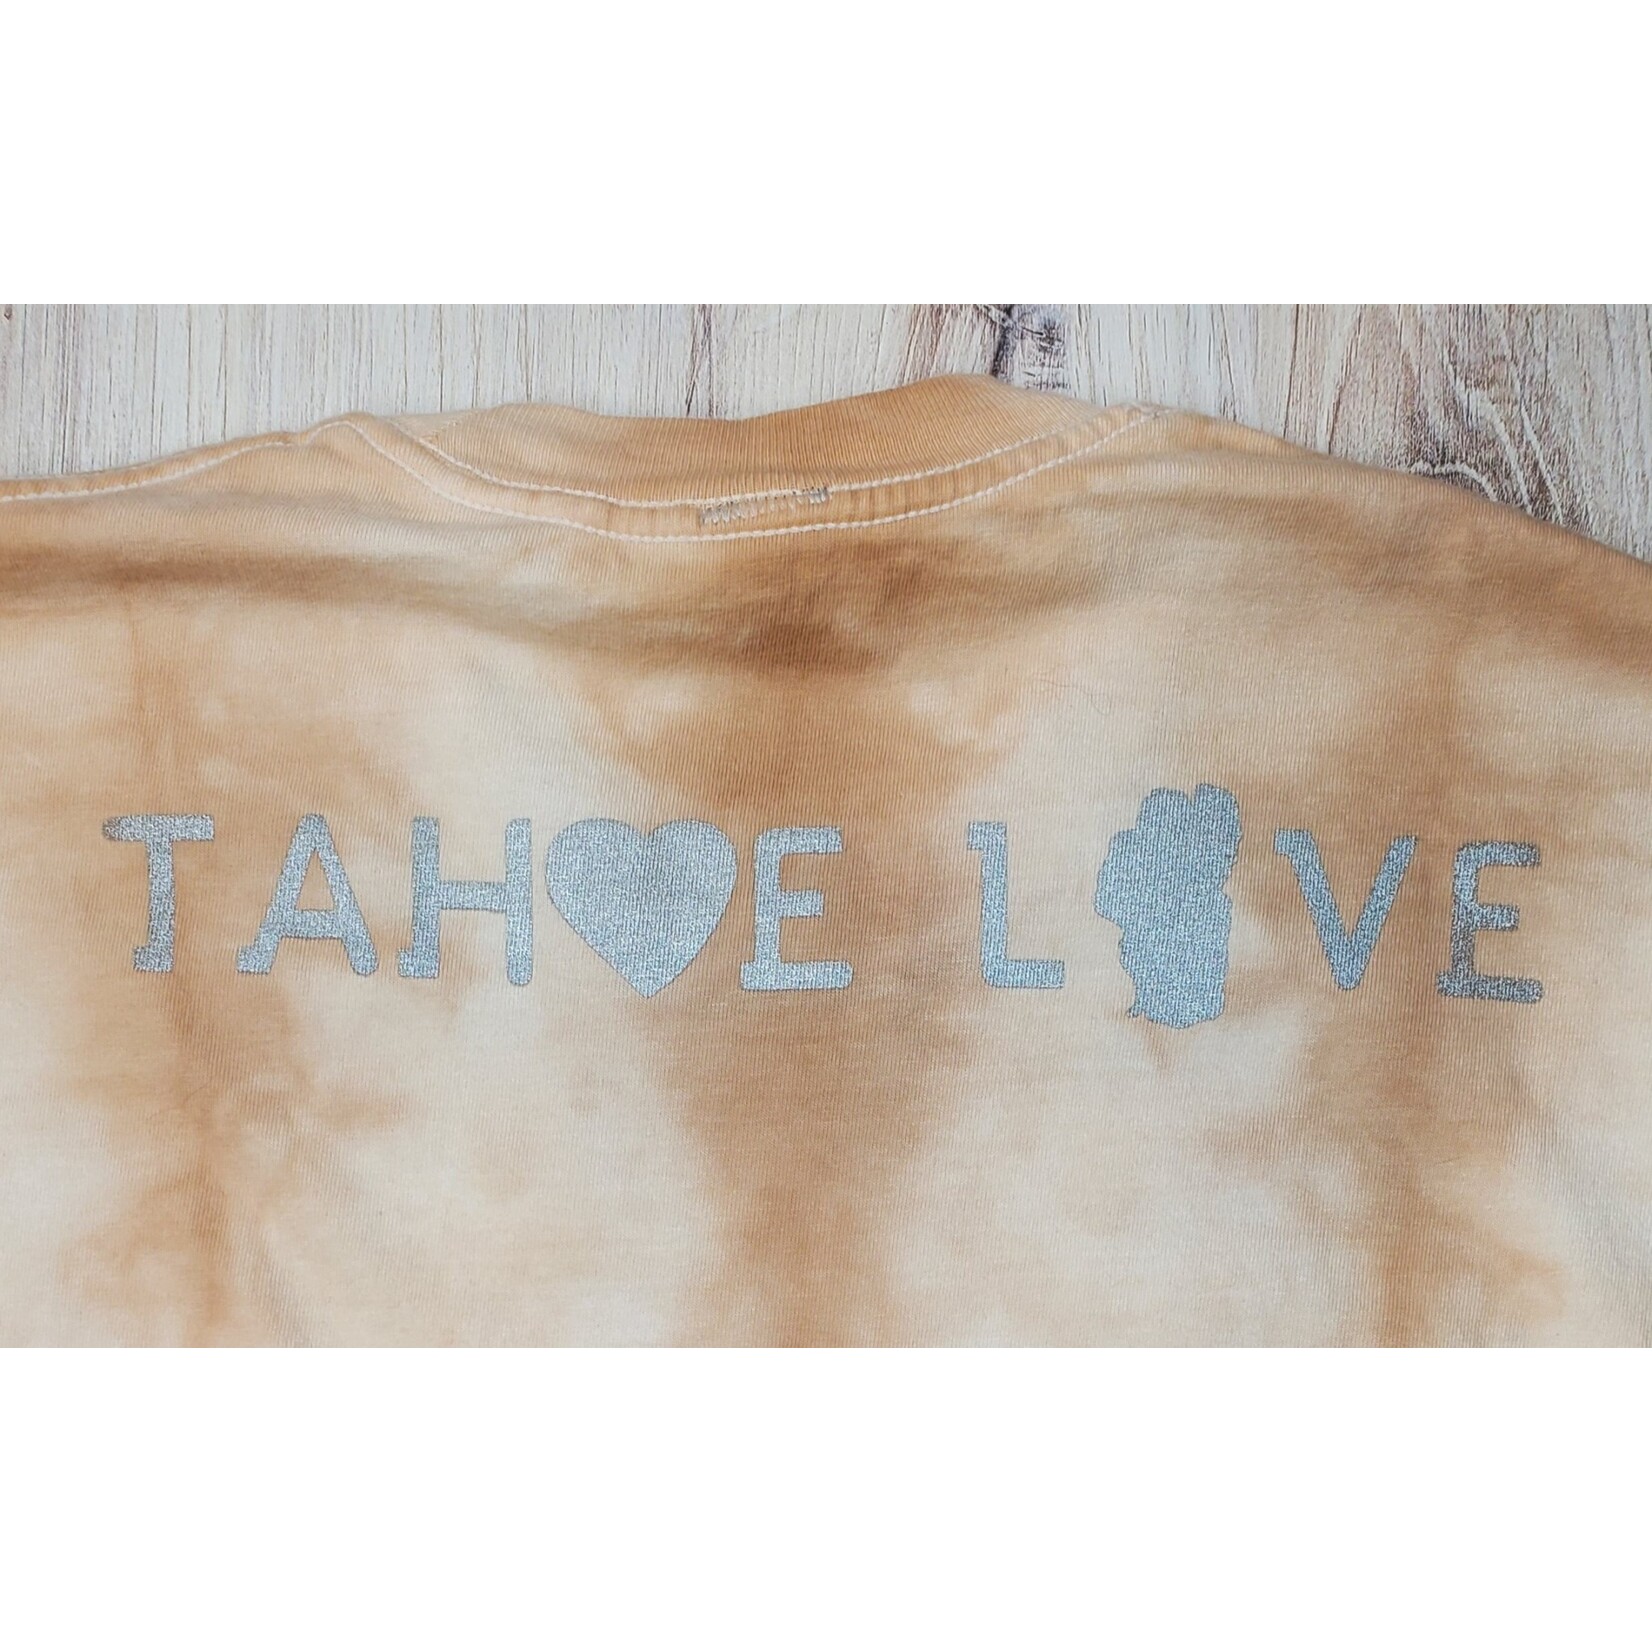 Knotty Bot Knitwear Tahoe Love T-Shirt - Text Print - Naturally Dyed